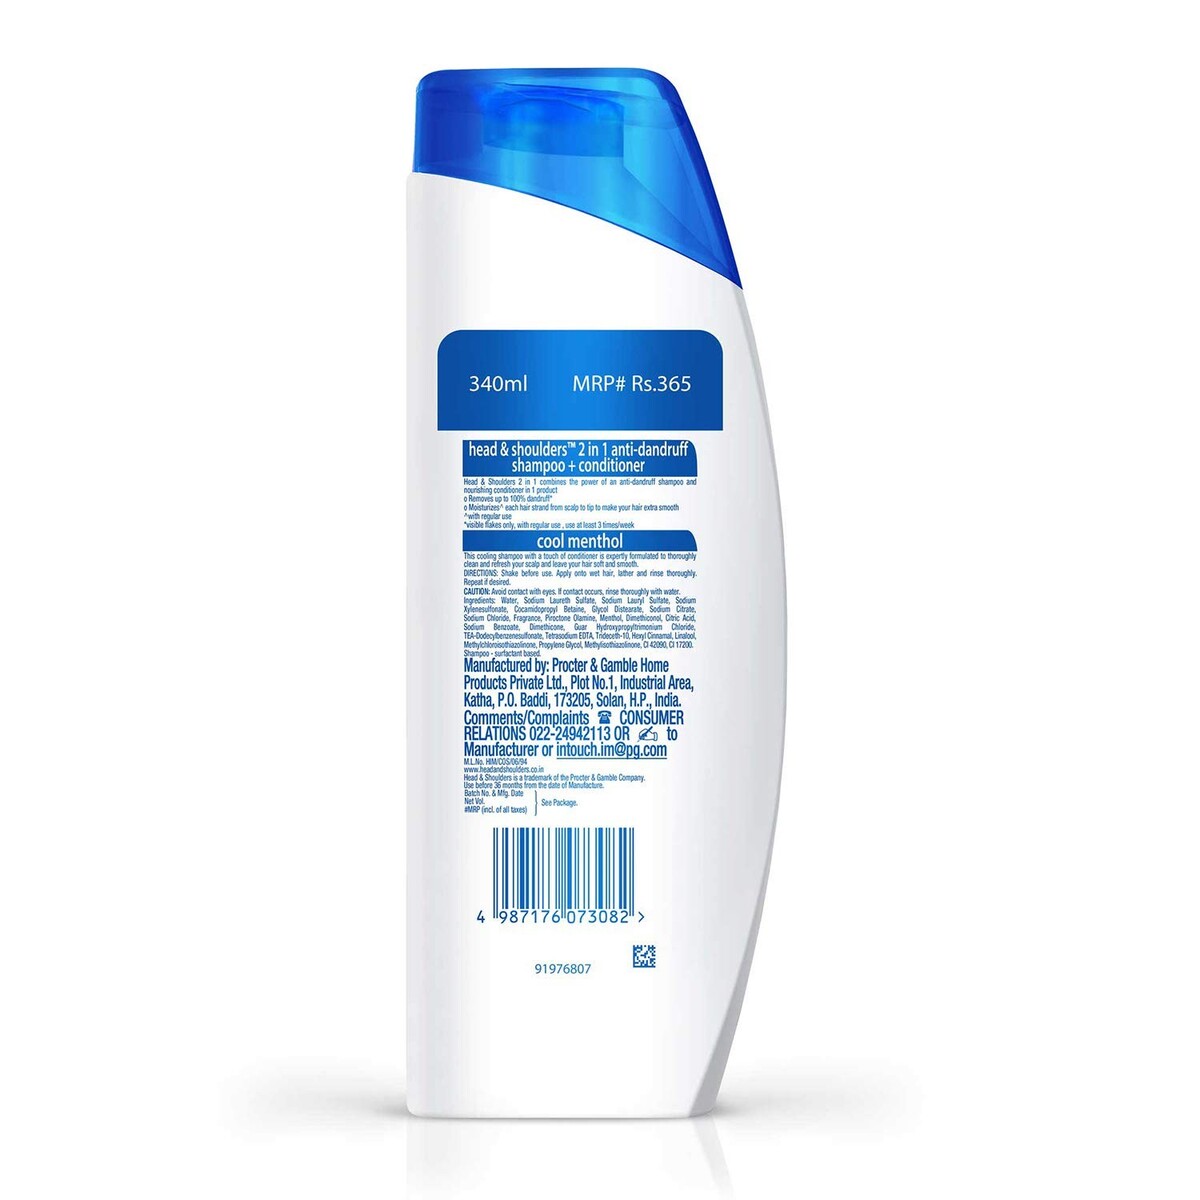 Head & Shoulders Shampoo + Conditioner 2 in 1 Cool Menthol 340ml